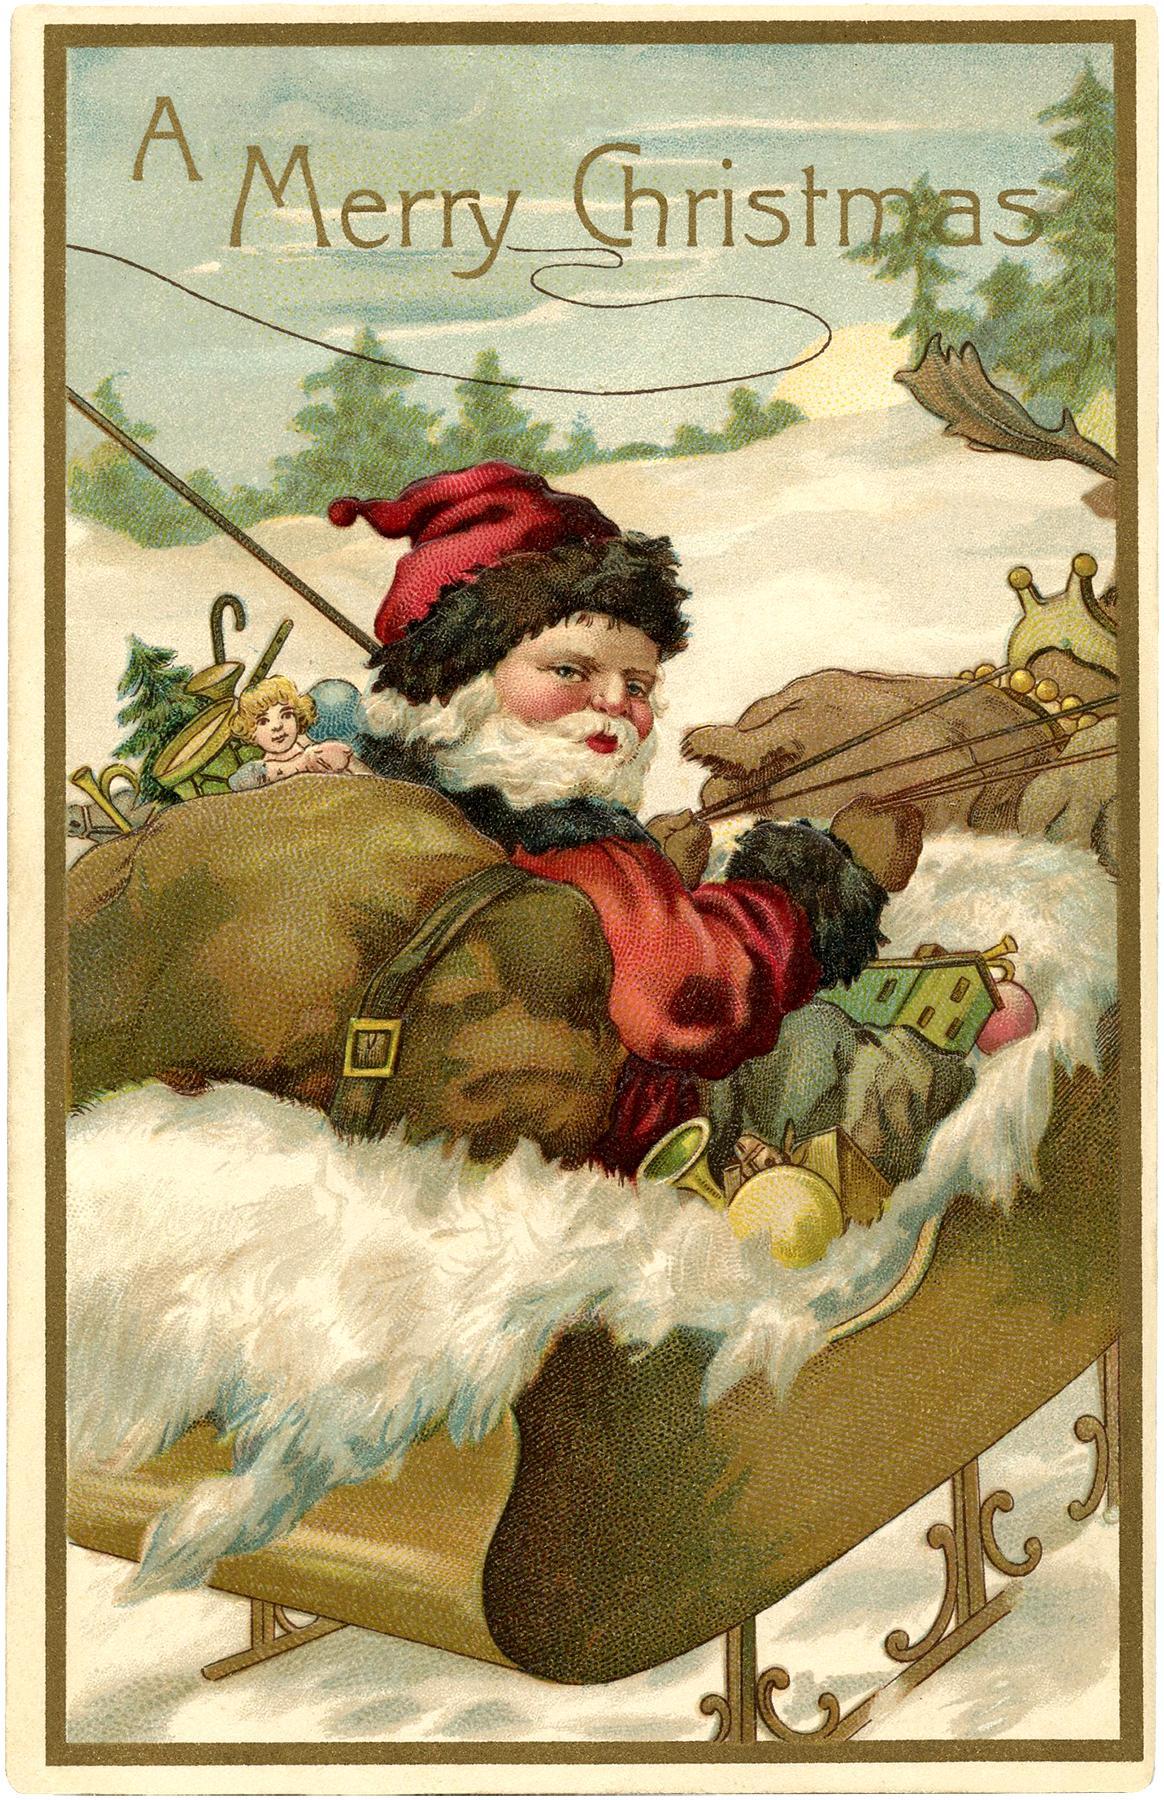 Santa Sleigh Image and More! Graphics Fairy